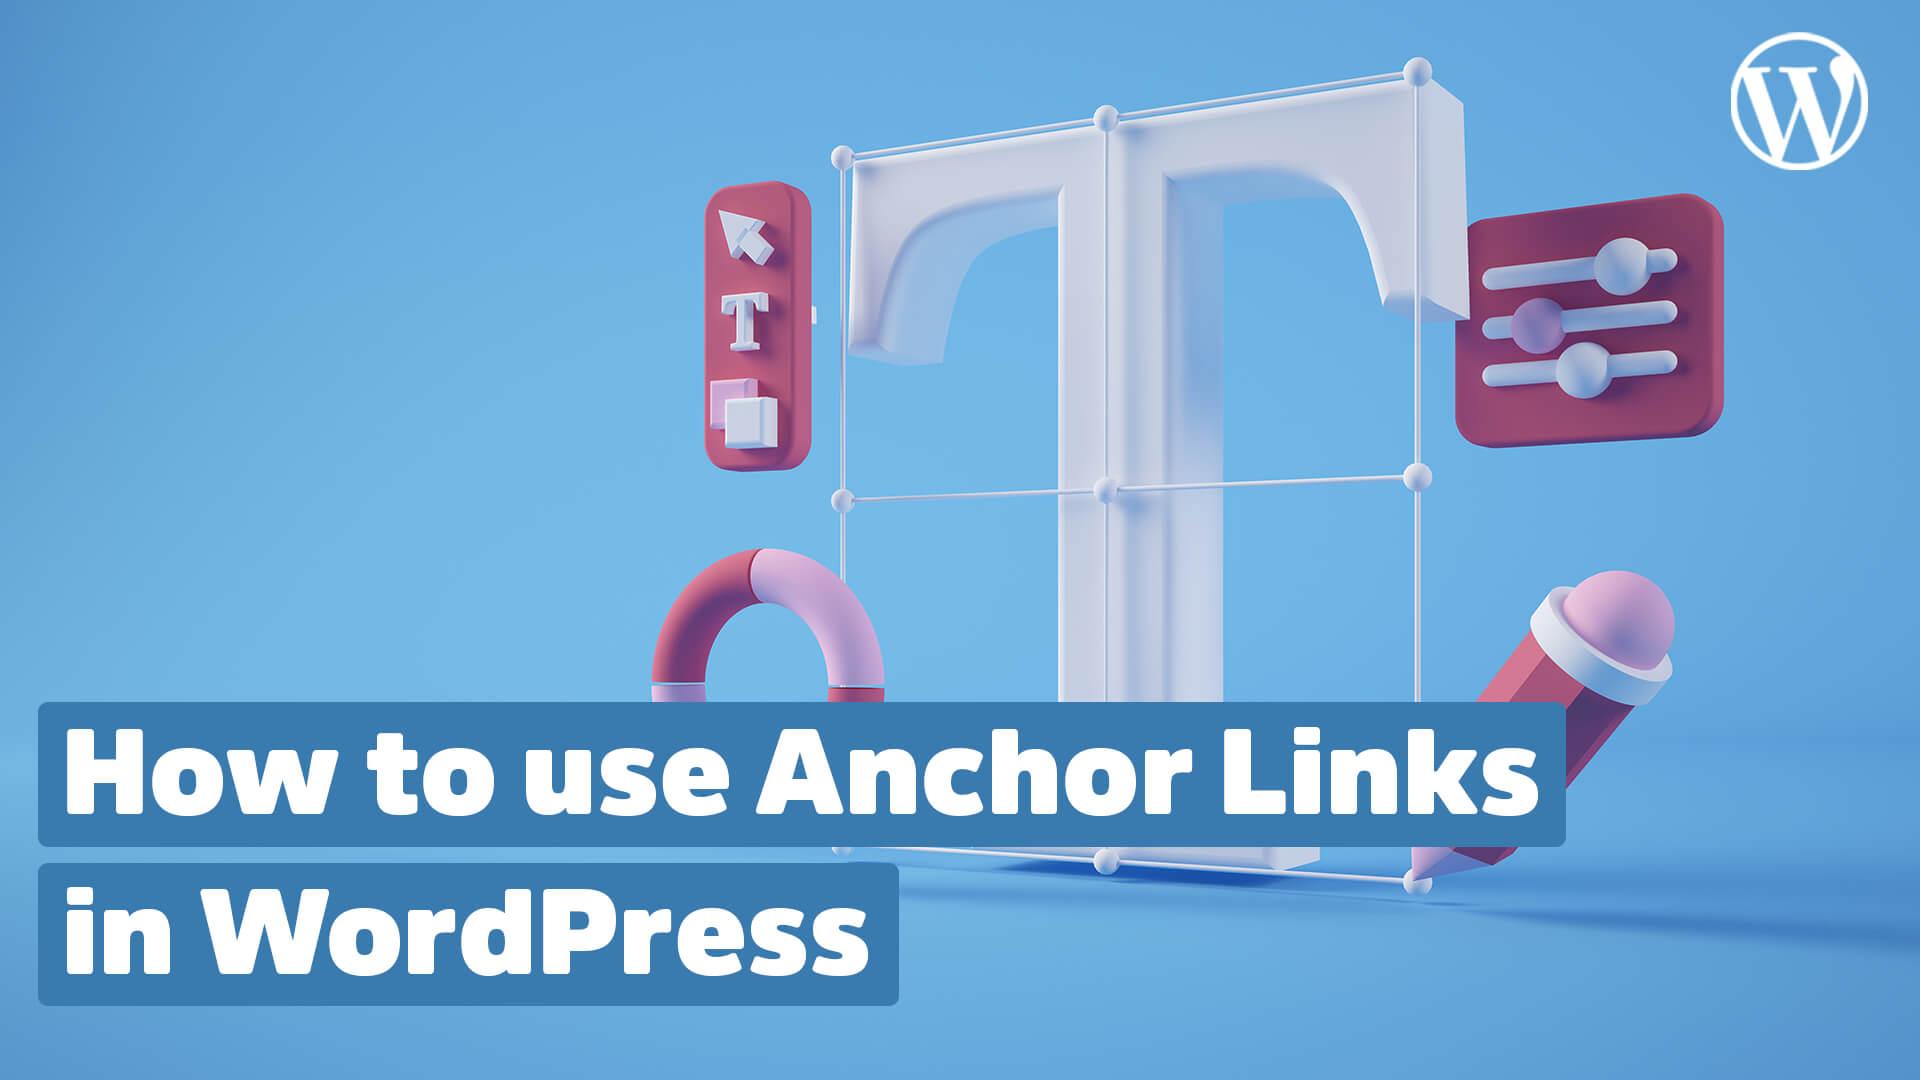 How to use WordPress anchor links